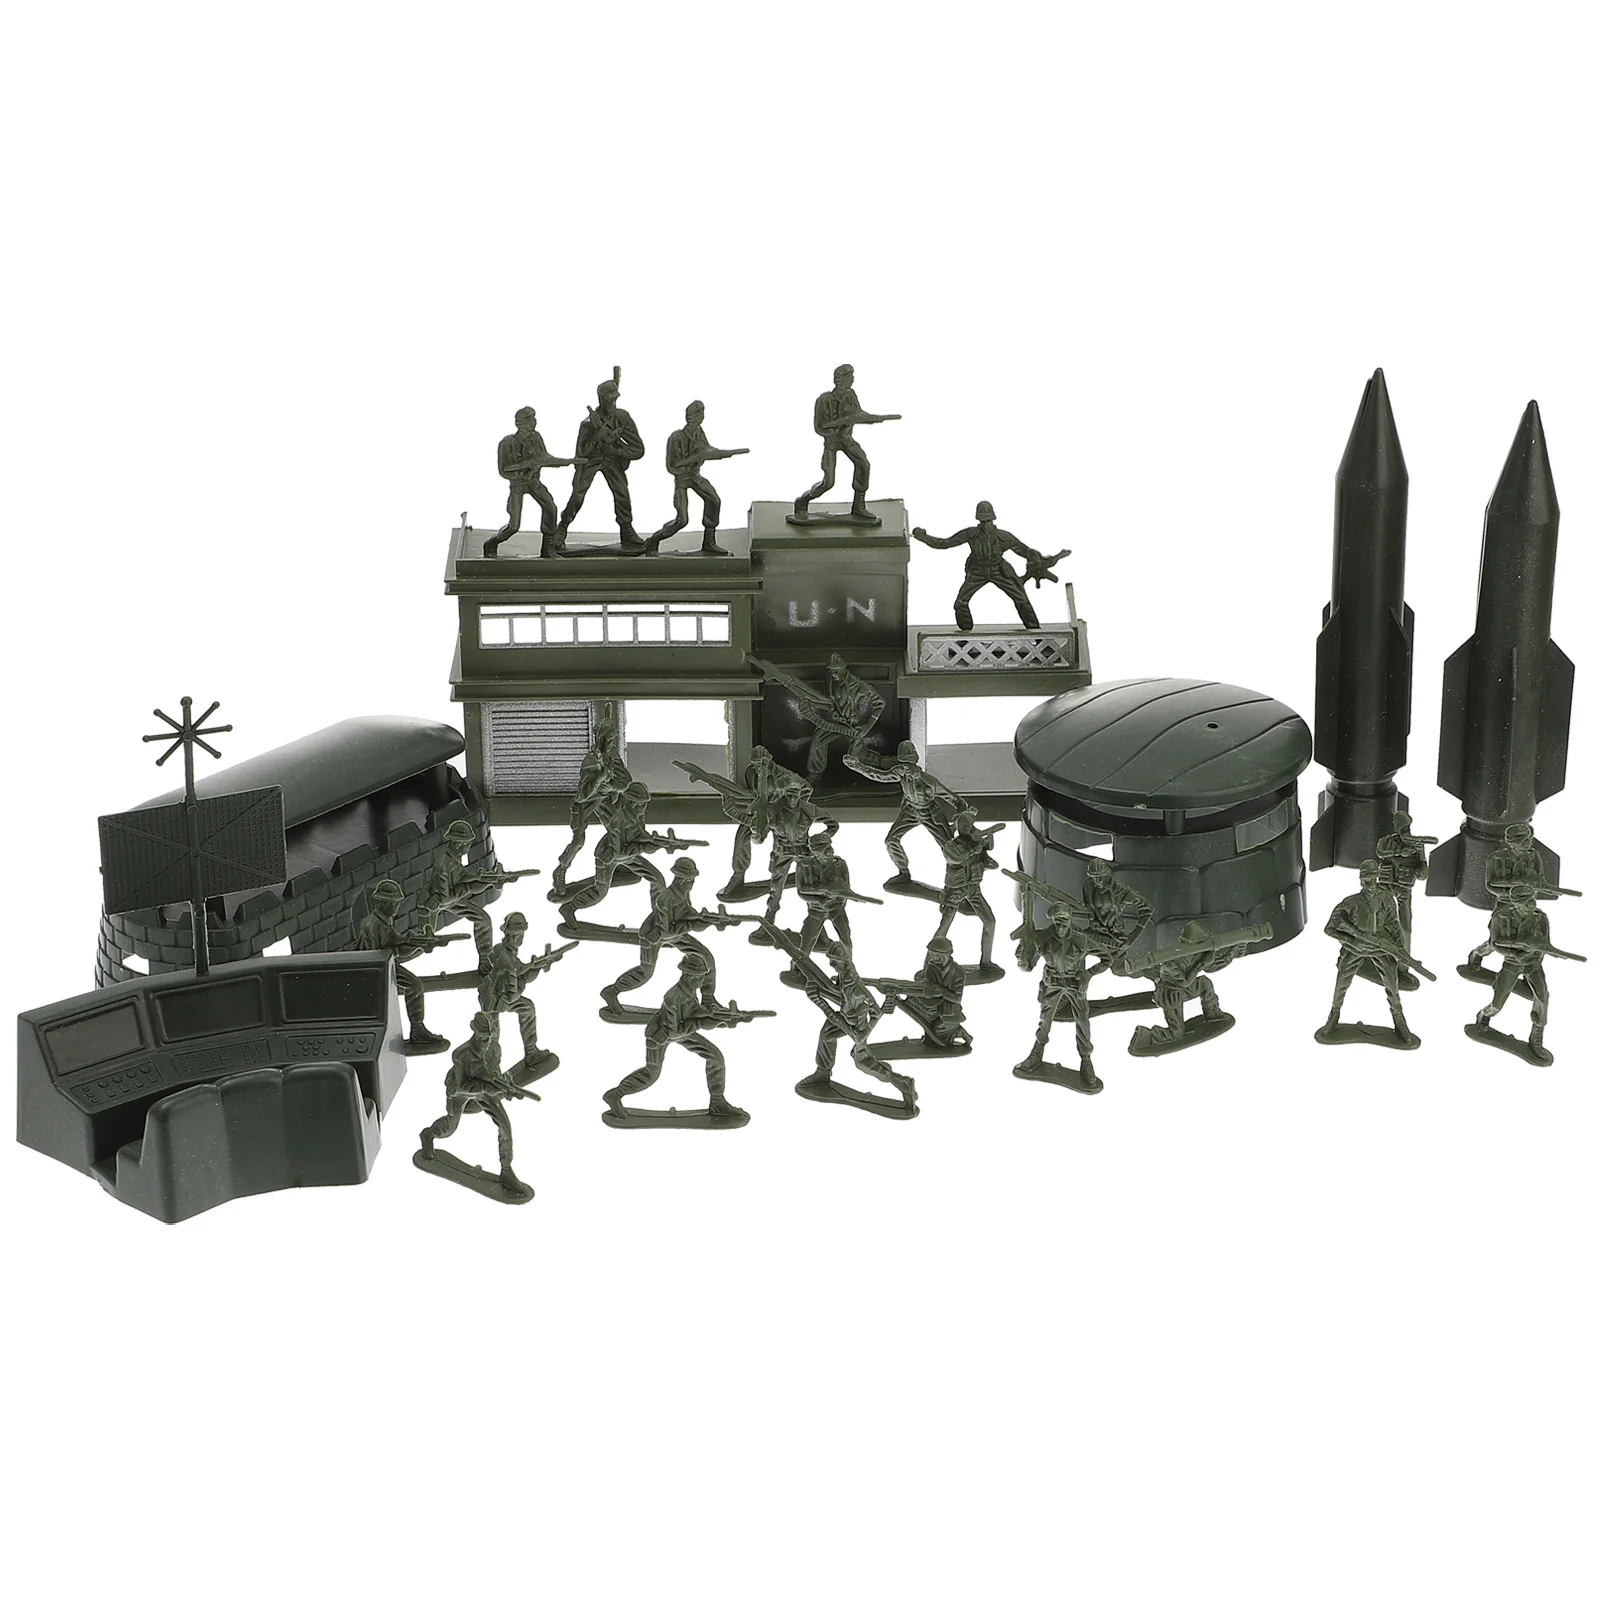 

56pcs Soldier Model Toys Funny Men Model Soldiers Playset Action Figures for Kids Children Play Birthday Party Favors